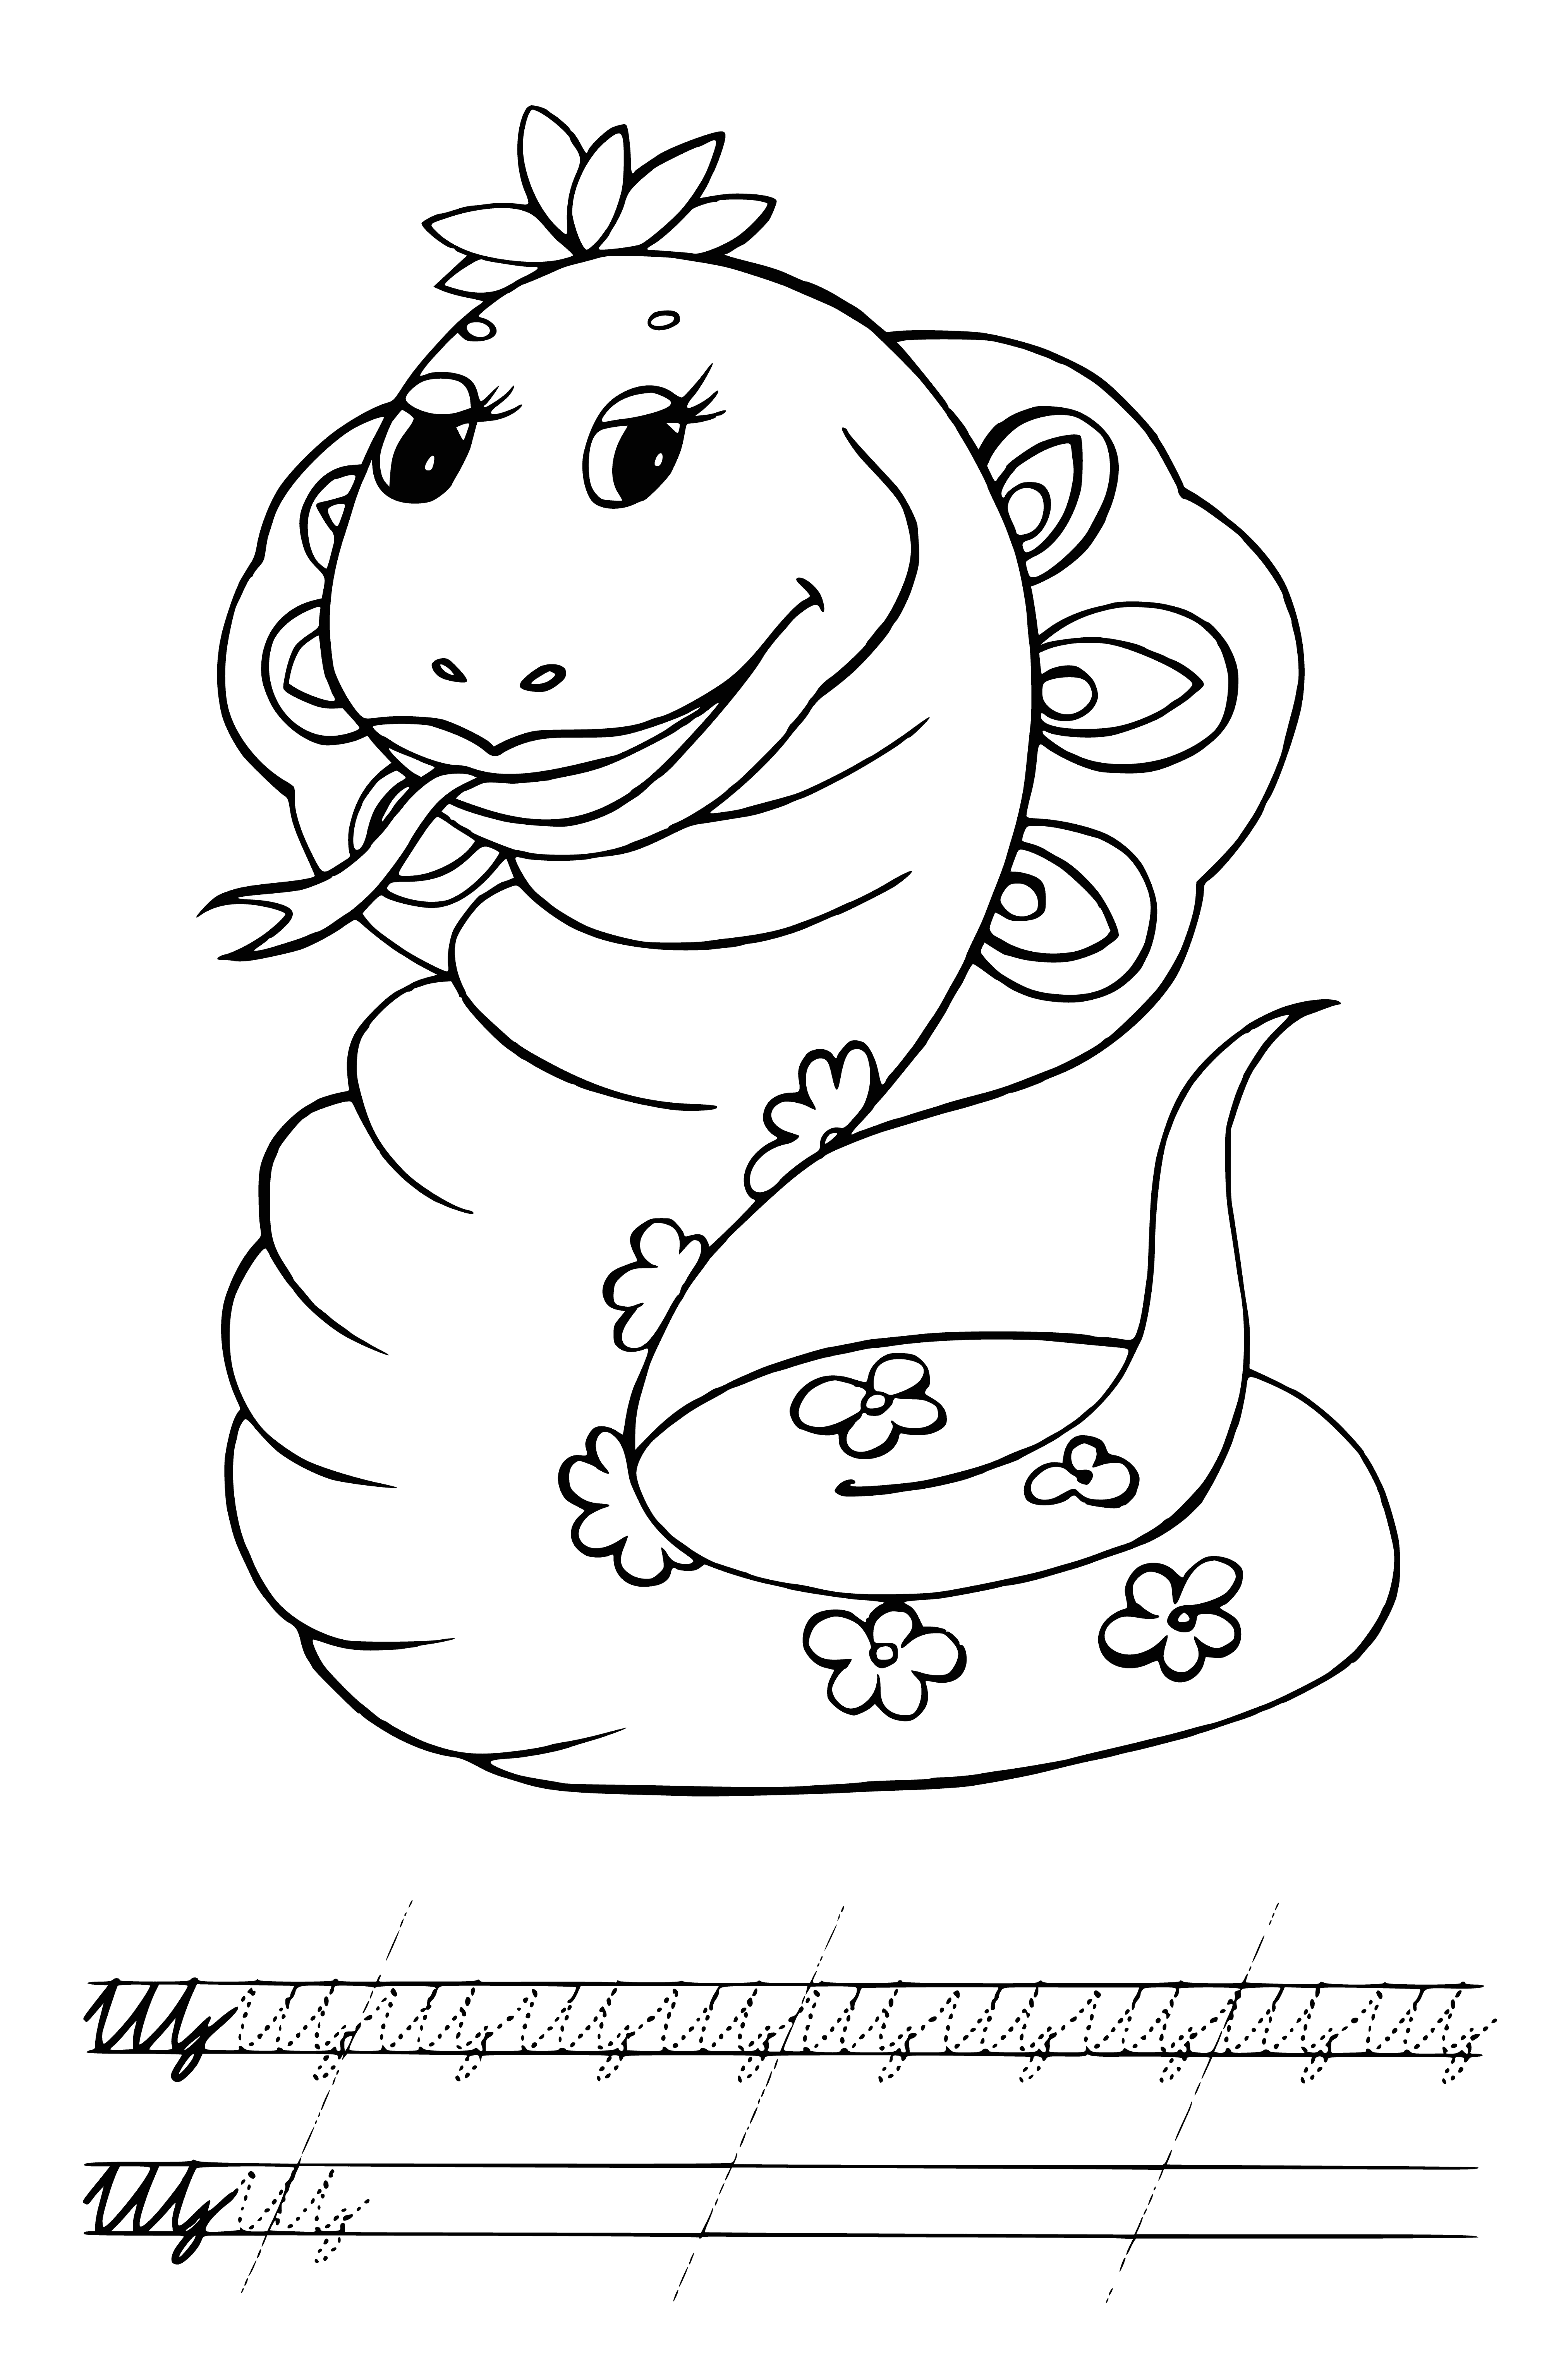 coloring page: A brown and white snake with a thin body and forked tongue curls on the ground, with small black eyes.